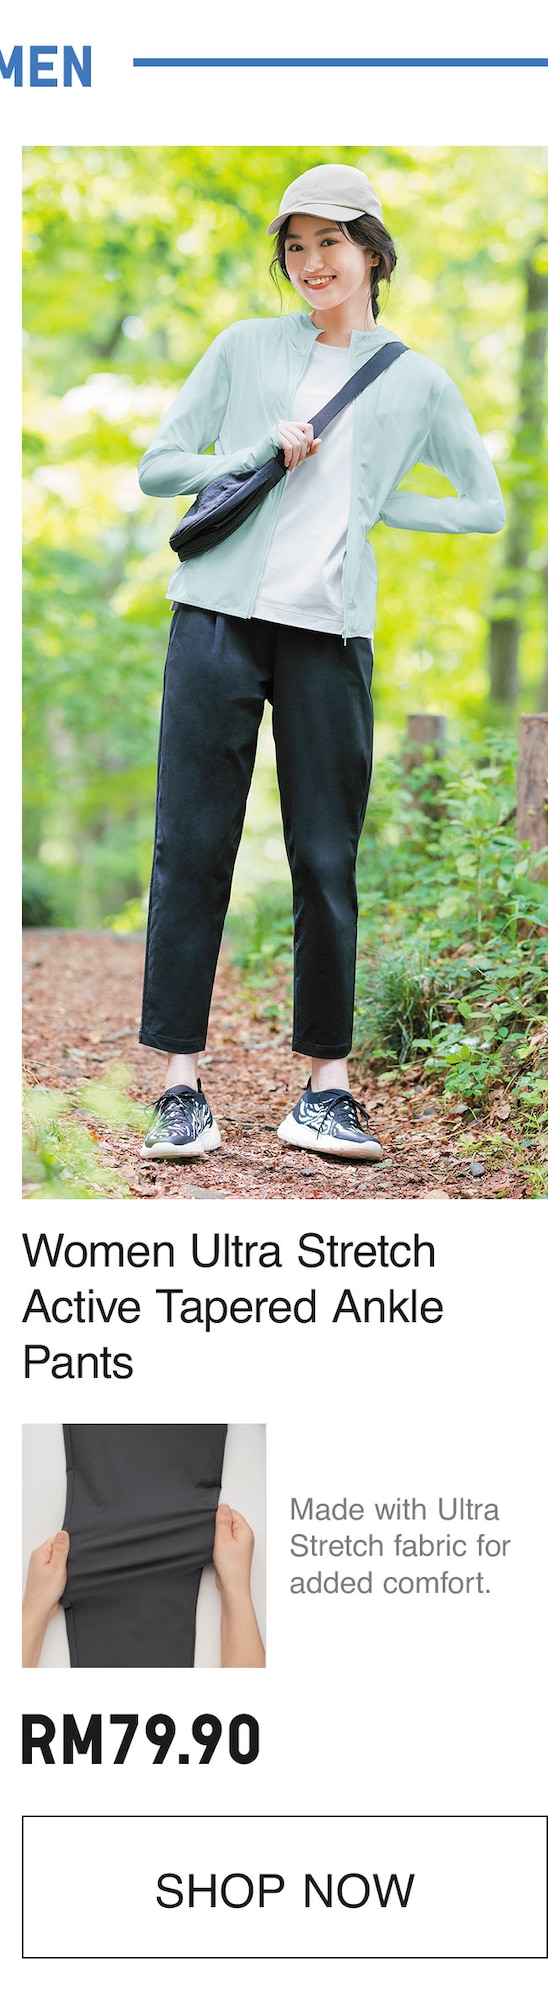 WOMEN ULTRA STRETCH ACTIVE TAPERED PANTS